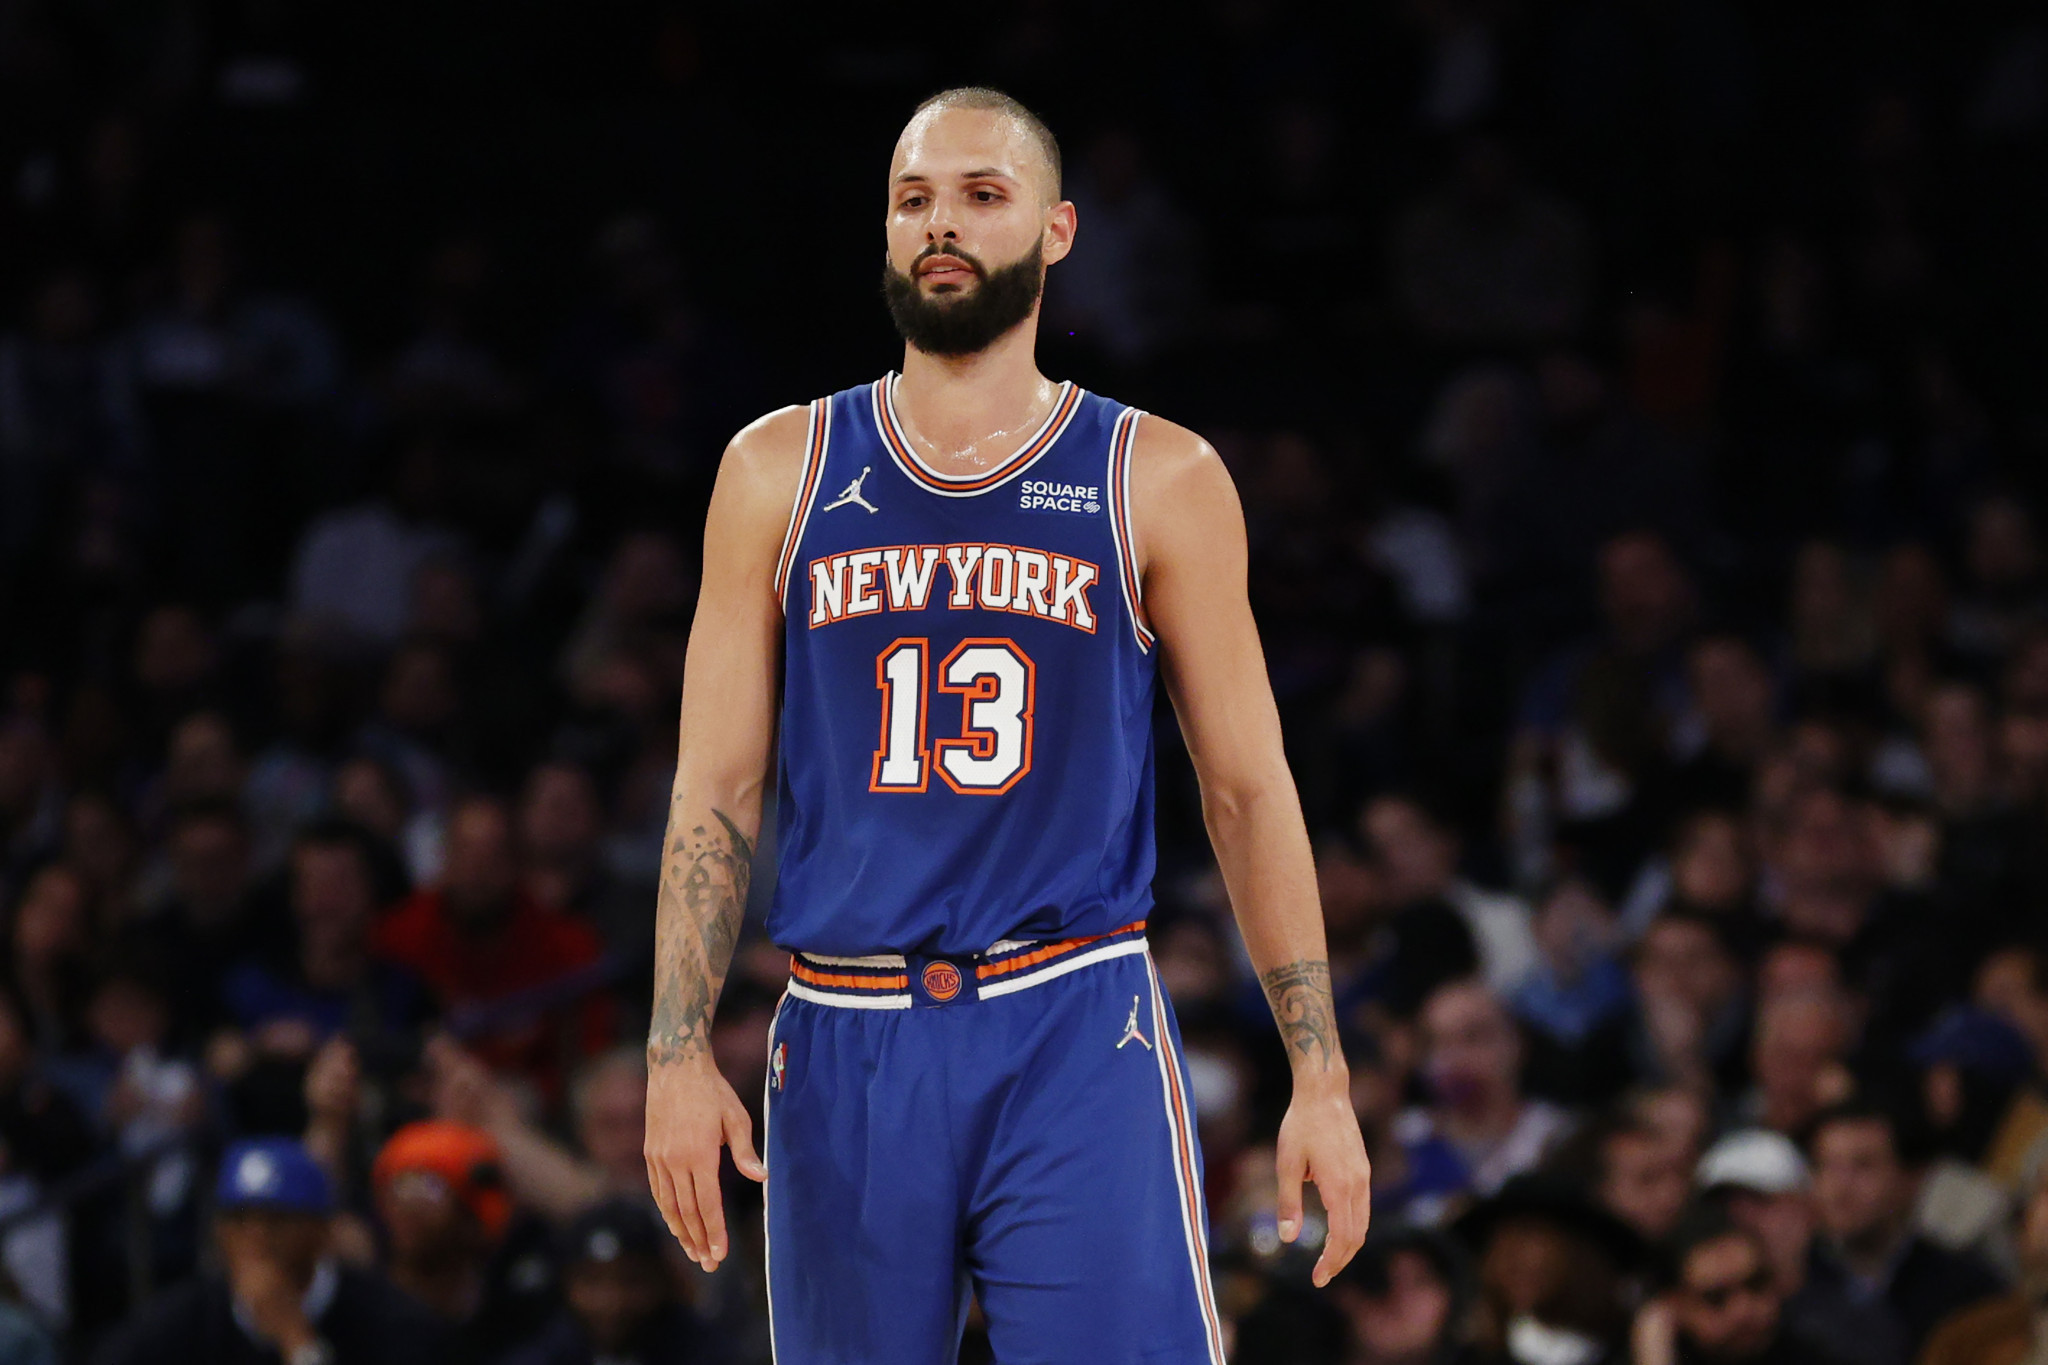 National Basketball Association player Evan Fournier was one of the French athletes to criticise the choice of the Arena Paris Sud ©Getty Images